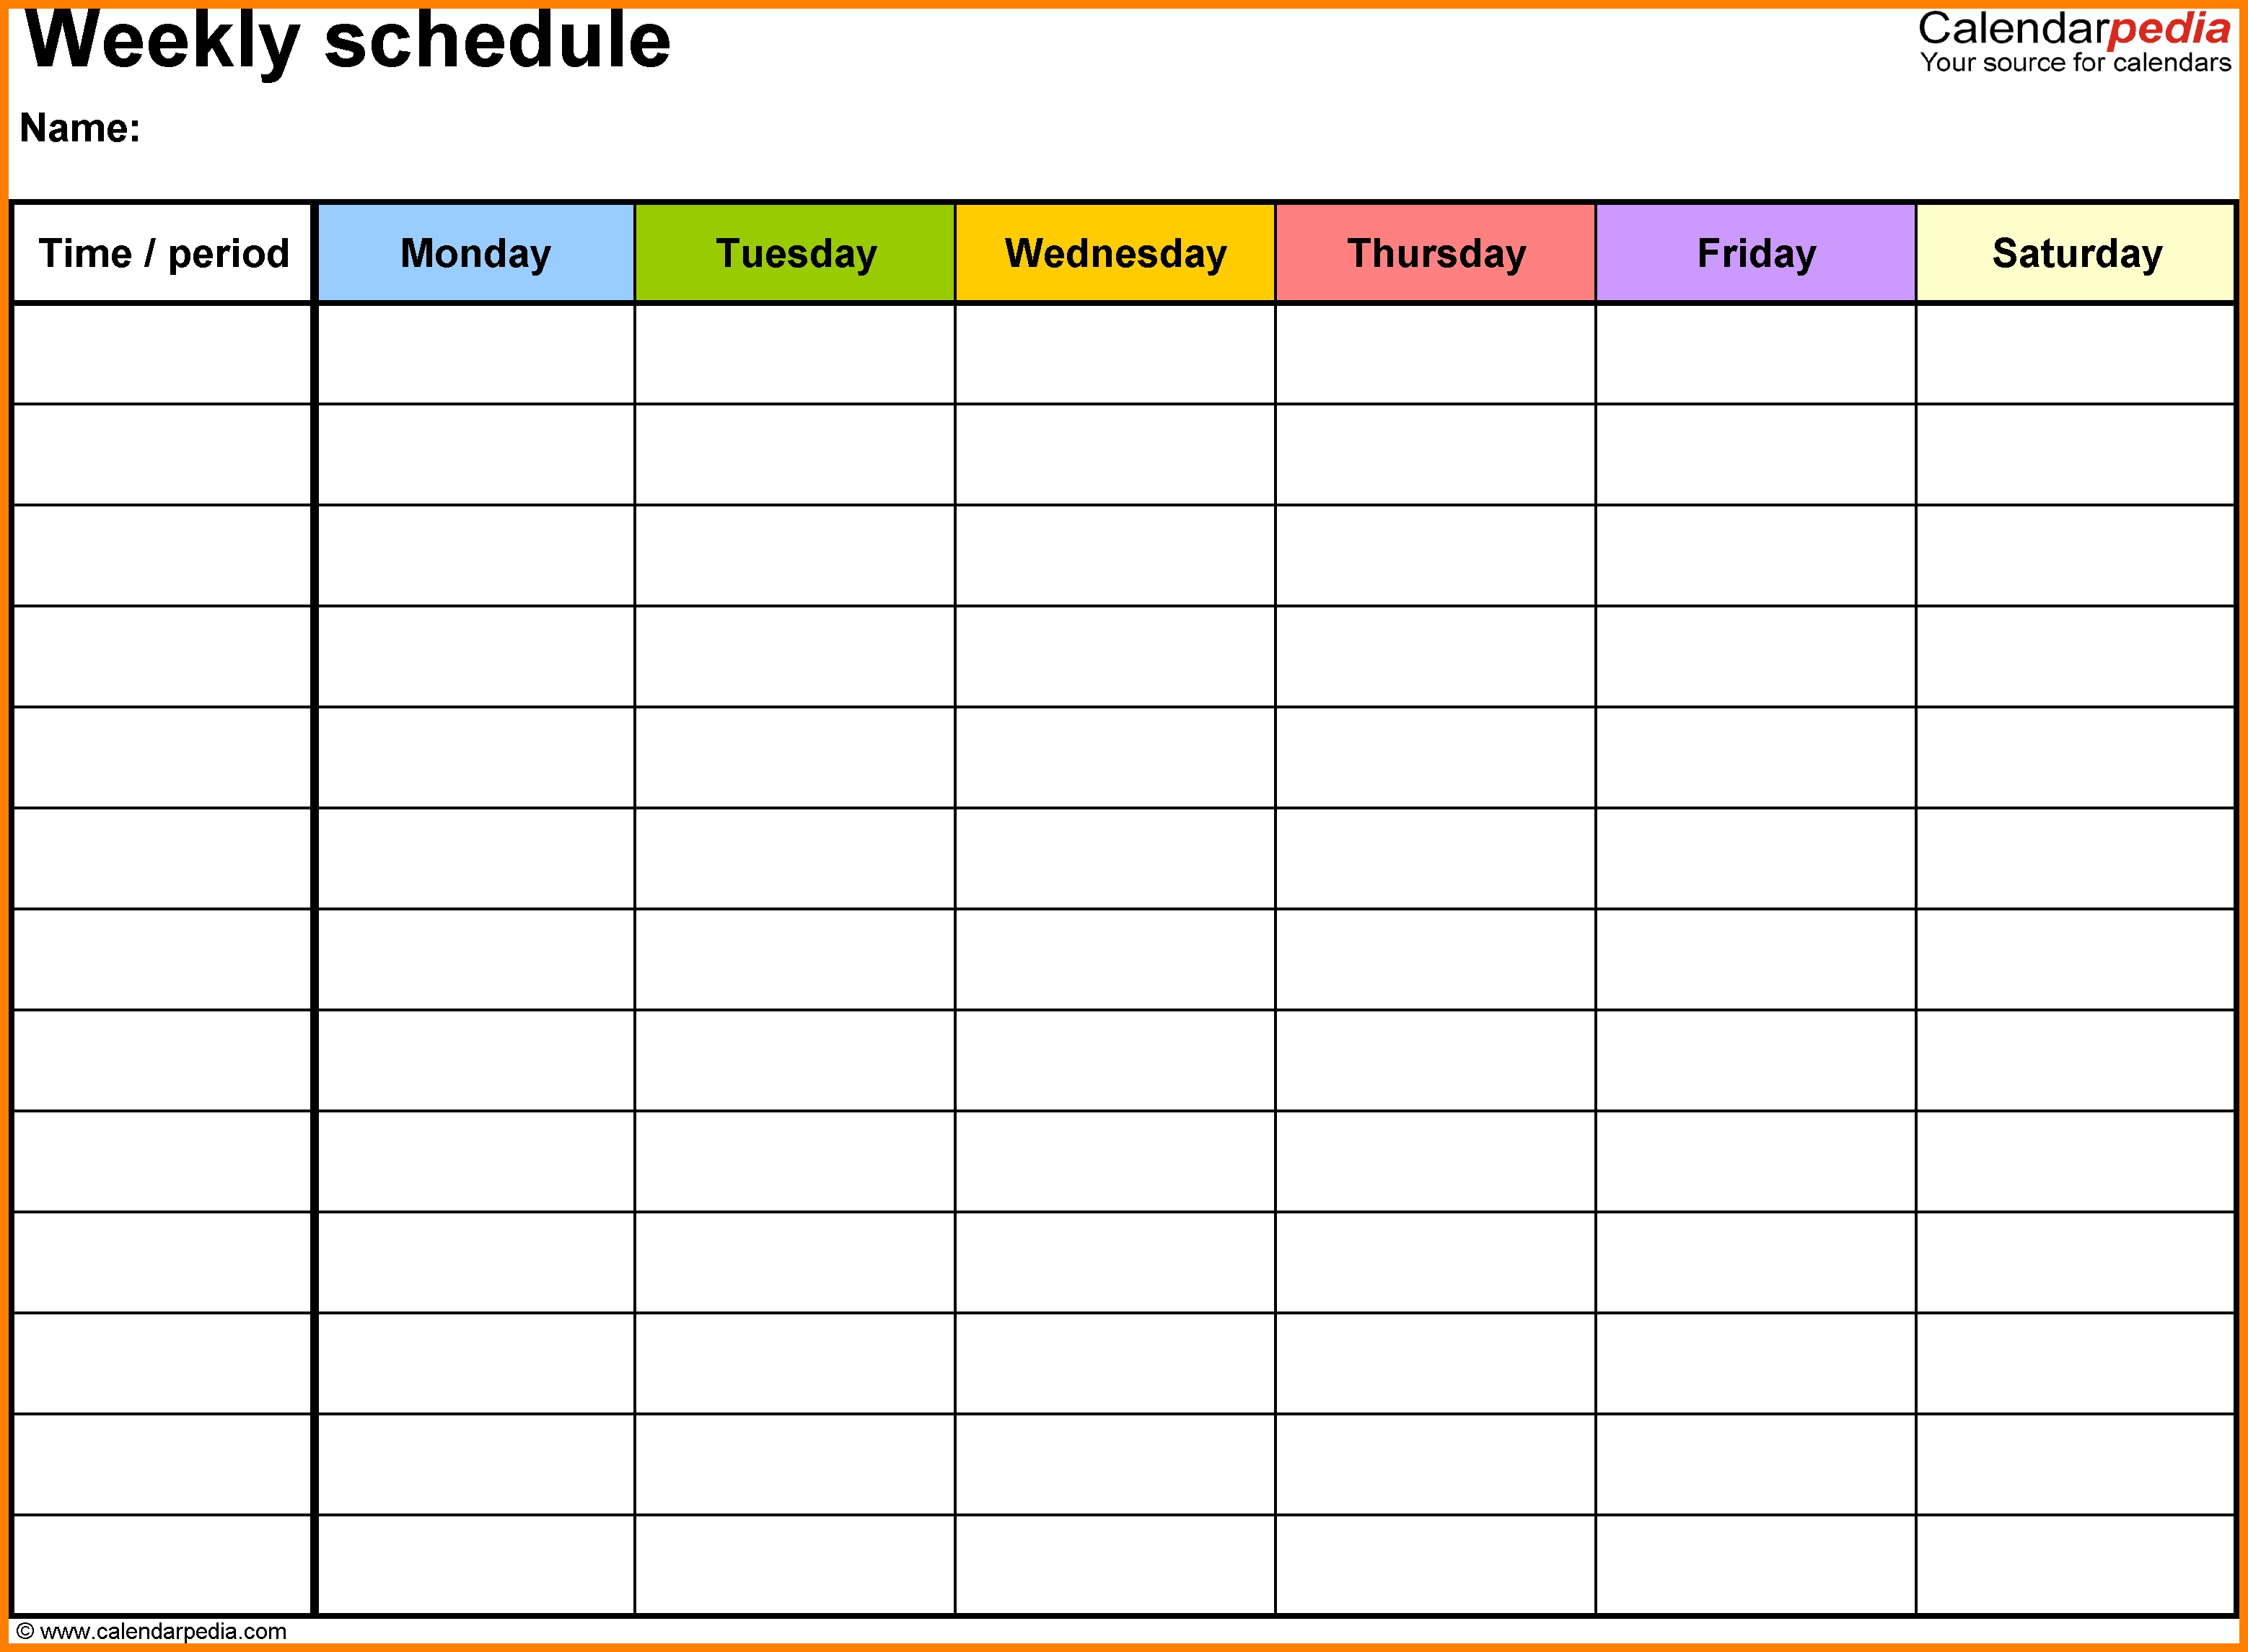 8+ Free Printable Weekly Calendar With Times | Reptile Shop Birmingham with regard to Printable Weekly Calendar With Time Slots